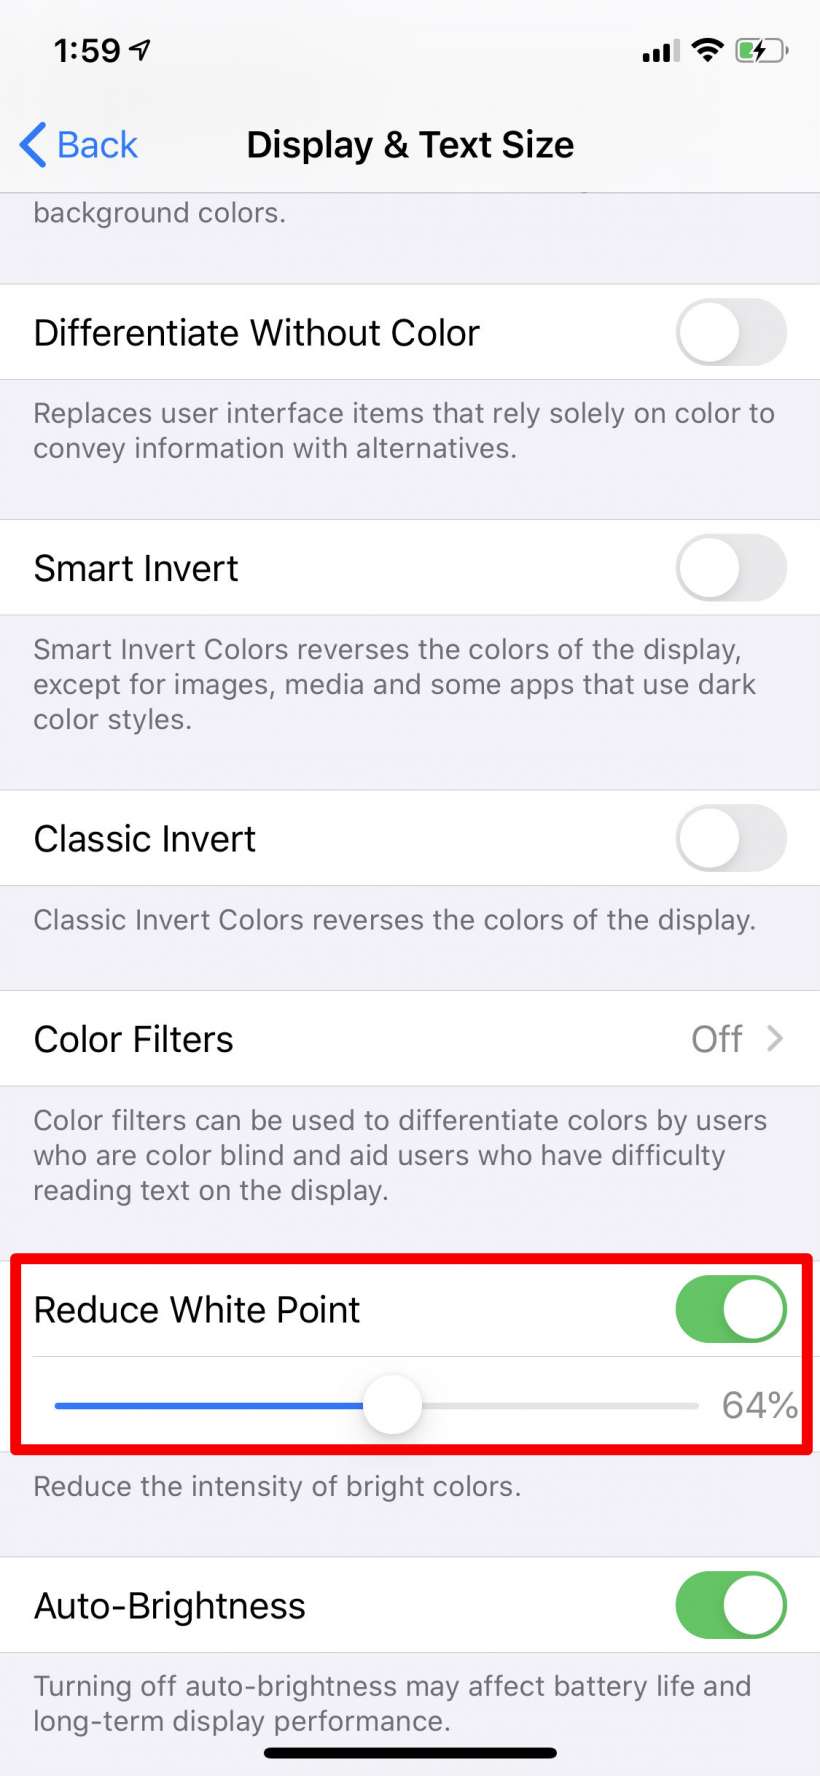 How to make your iPhone or iPad display even dimmer than the dimmest brightness setting.